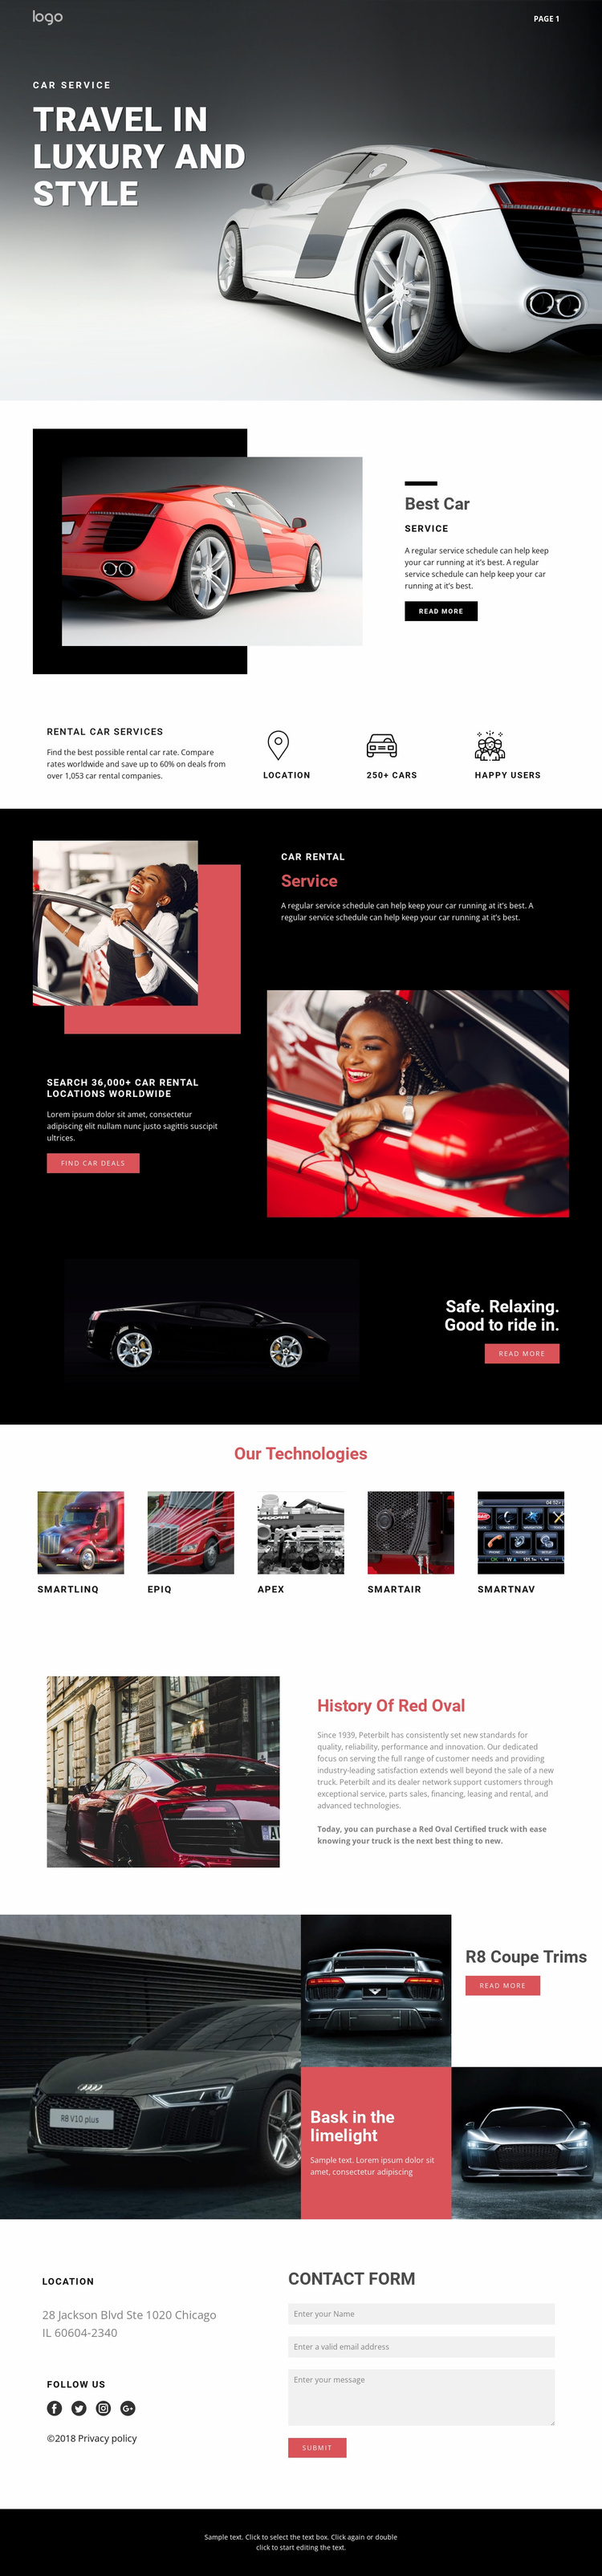 Traveling in luxury cars Landing Page